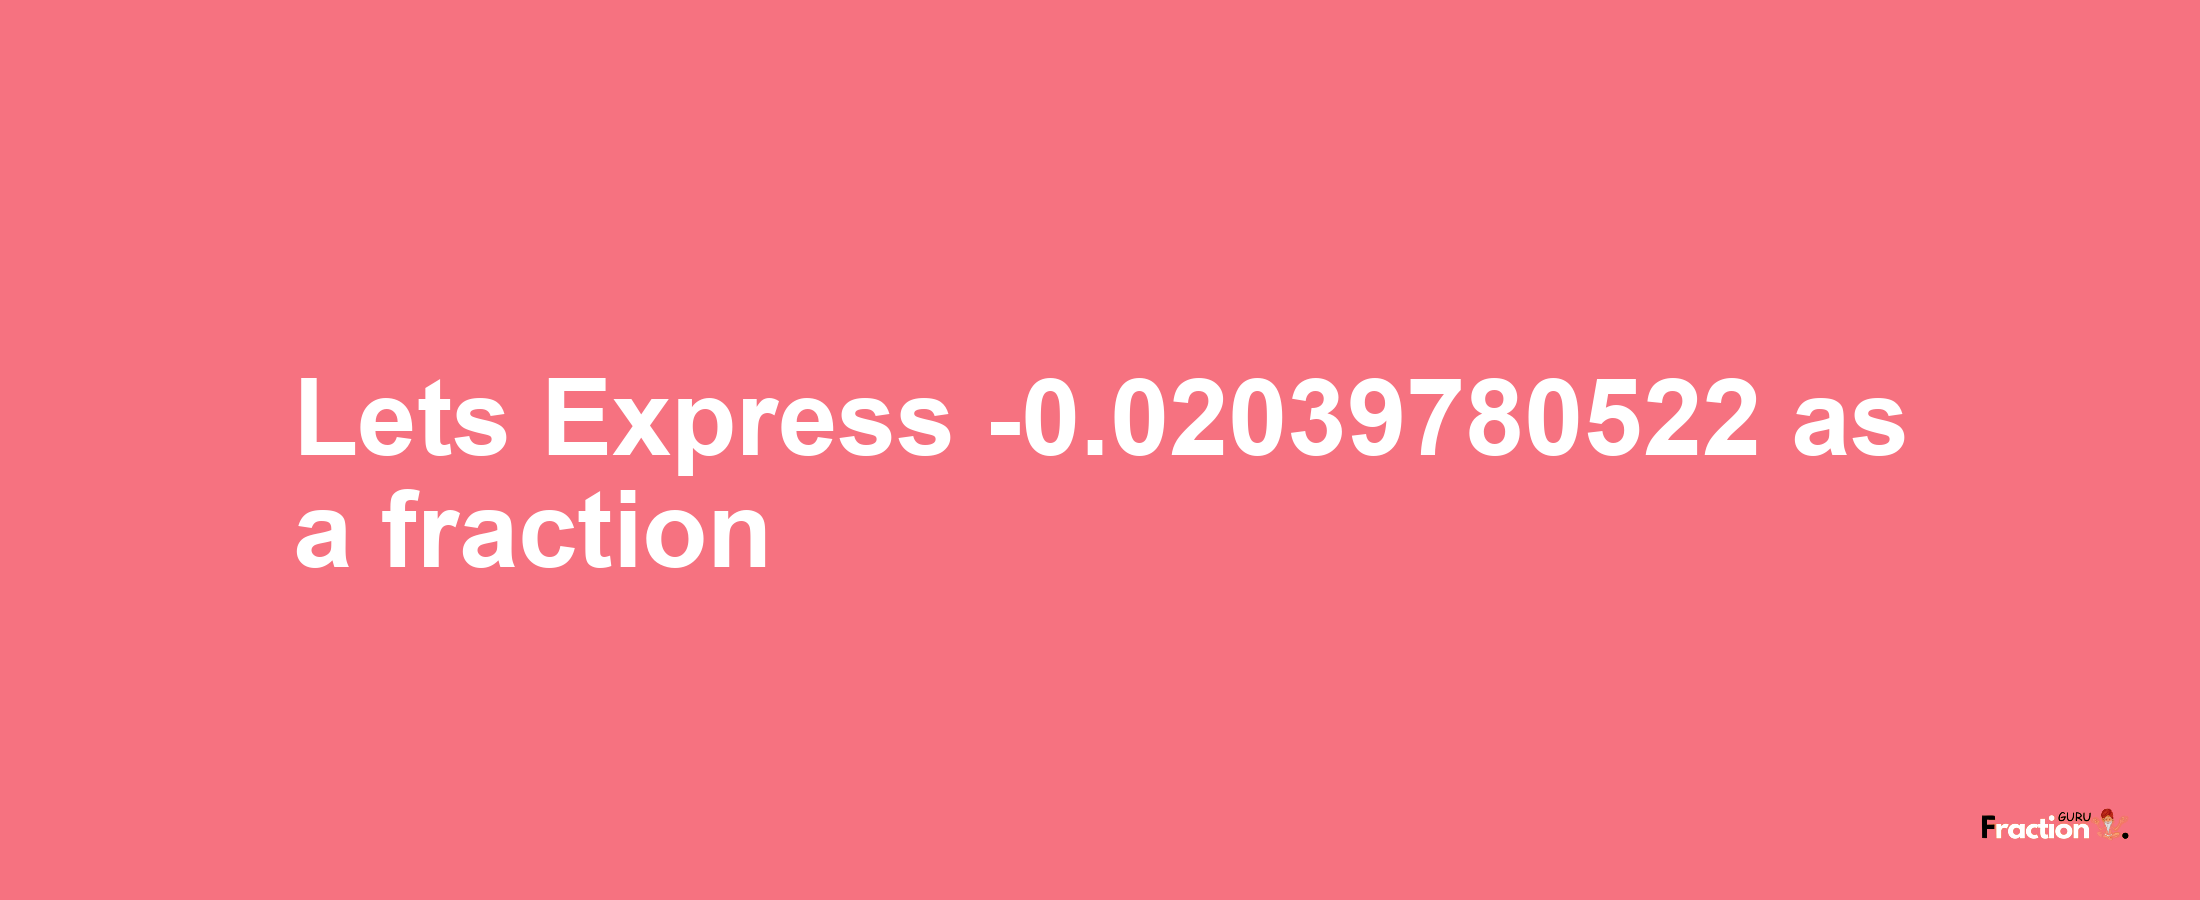 Lets Express -0.02039780522 as afraction